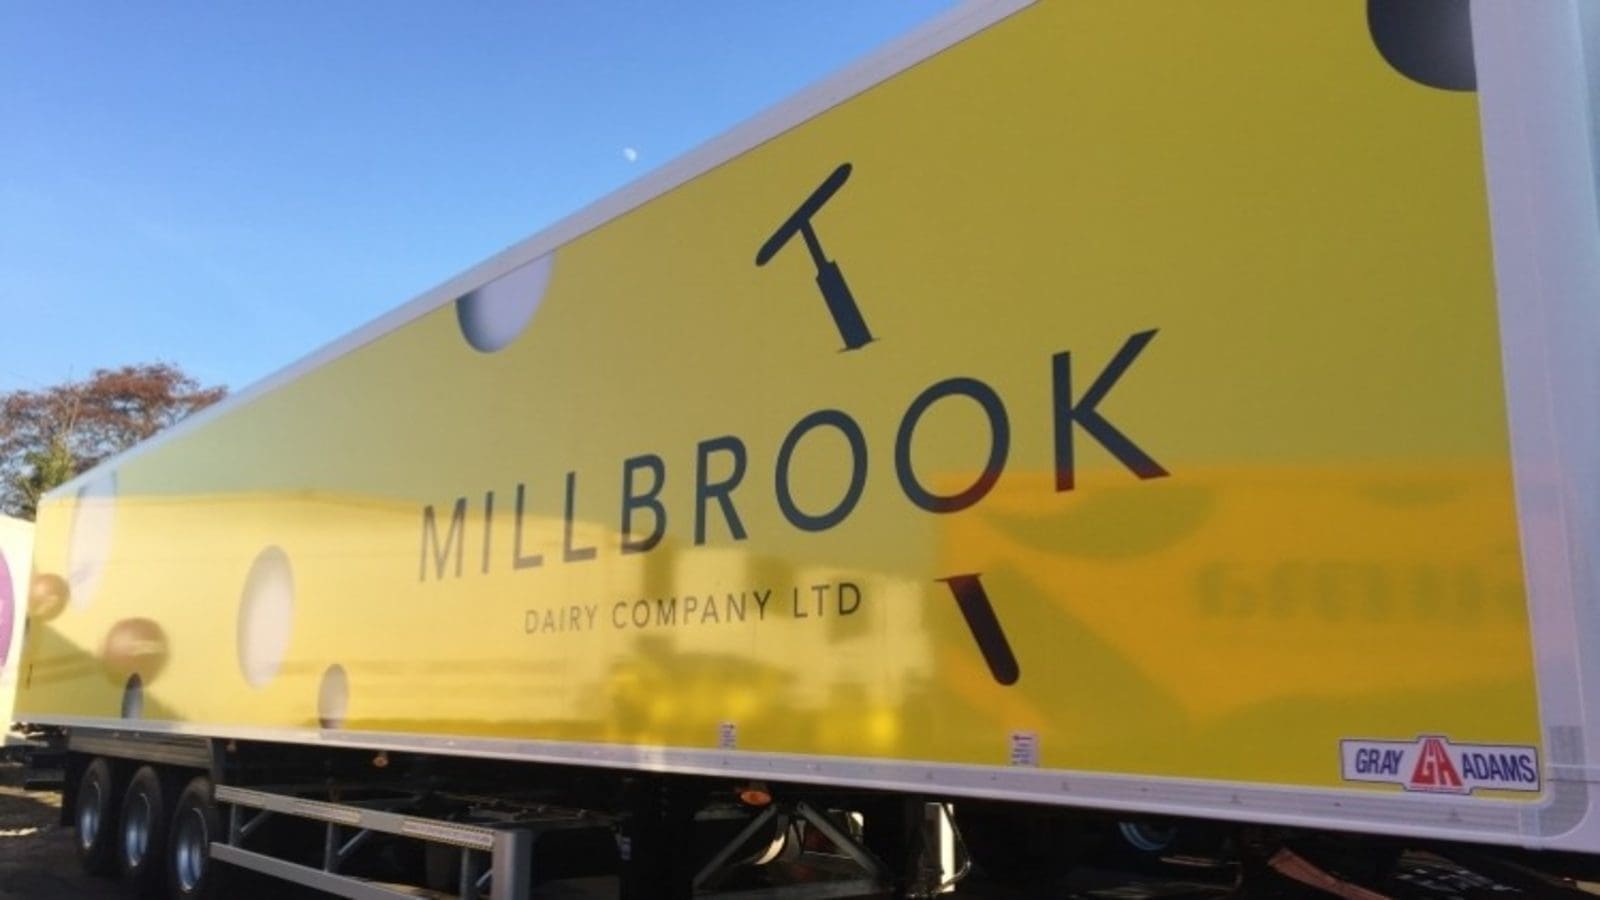 Millbrook Dairy expands into Europe with launch of new subsidiary in Netherlands